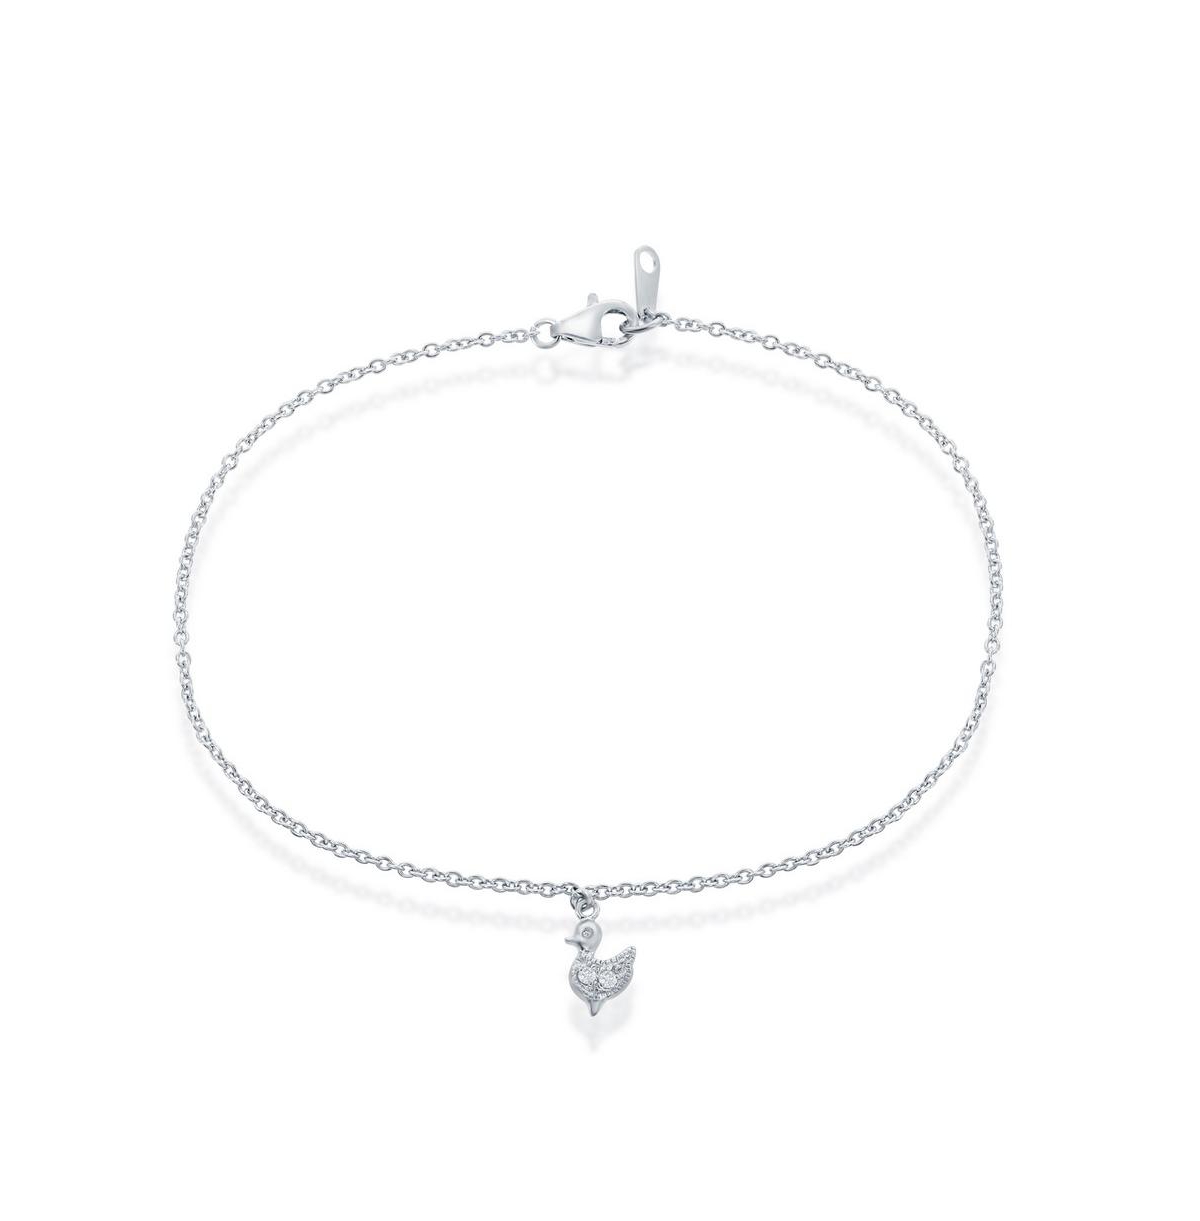 Simona Sterling Silver Anklet W/ Hanging Cz Duck